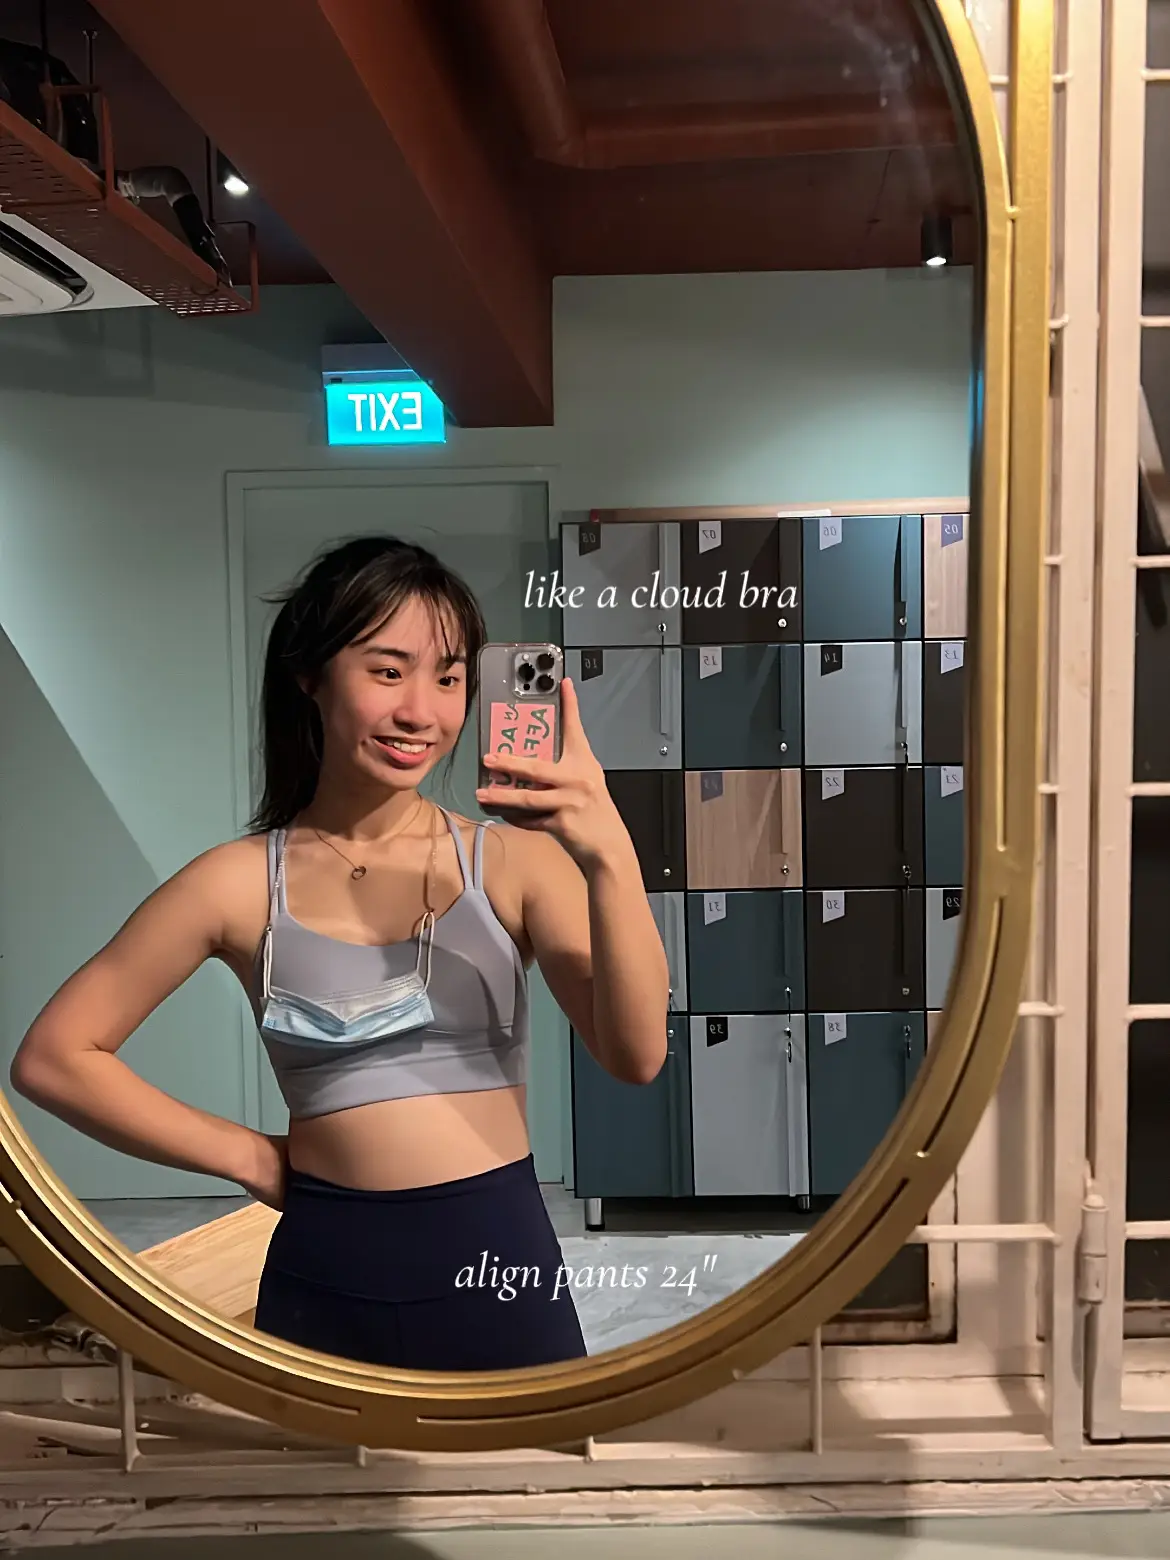 Lululemon fits you need to get on 🍋💗, Gallery posted by jingyi🌷